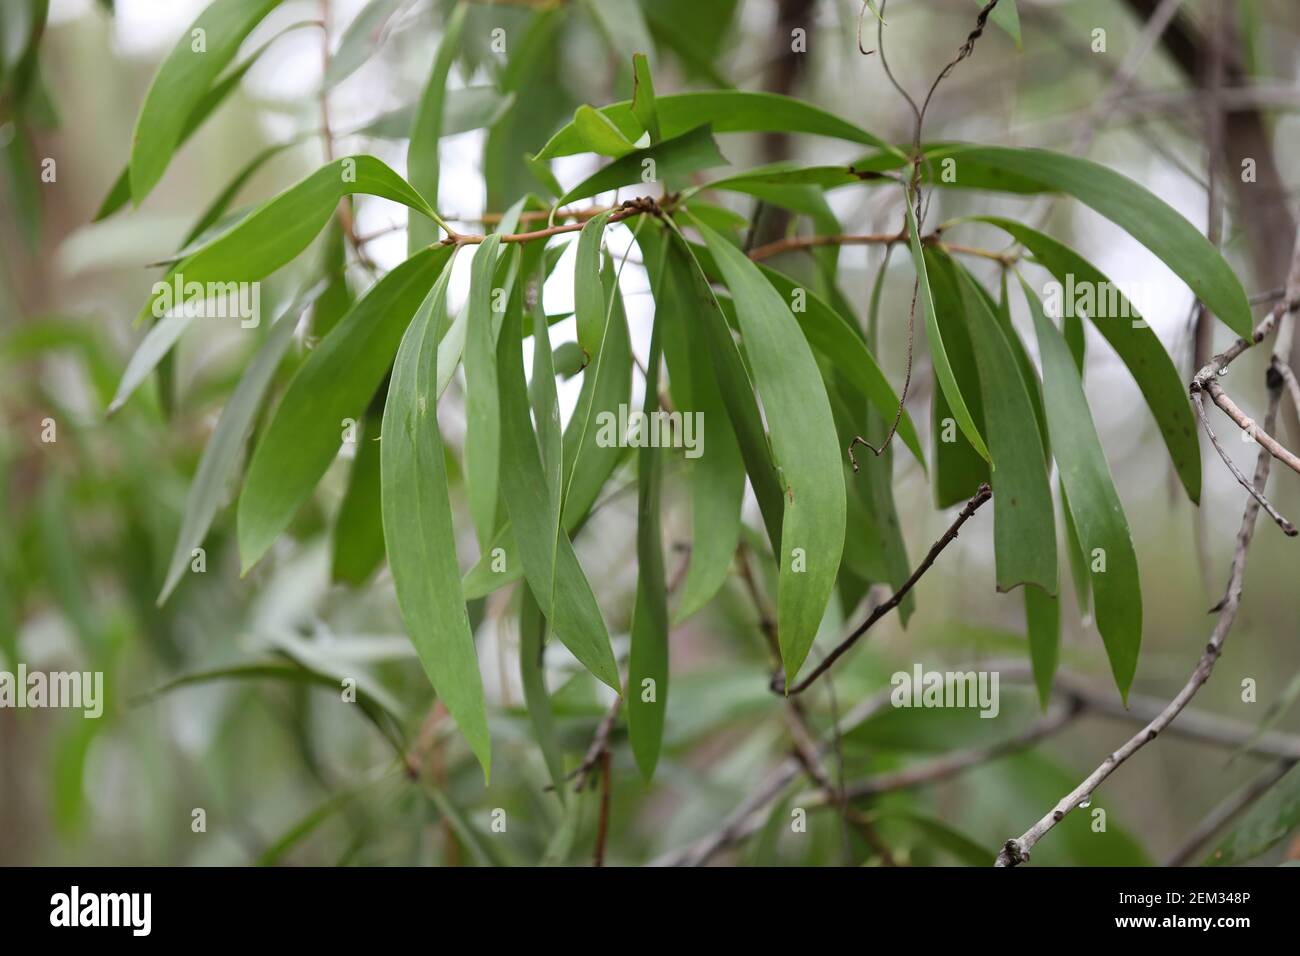 Persoonia levis, commonly known as the broad-leaved geebung, a native shrub seen in Lane Cove National Park, Thornleigh, Sydney, NSW, Australia. Stock Photo